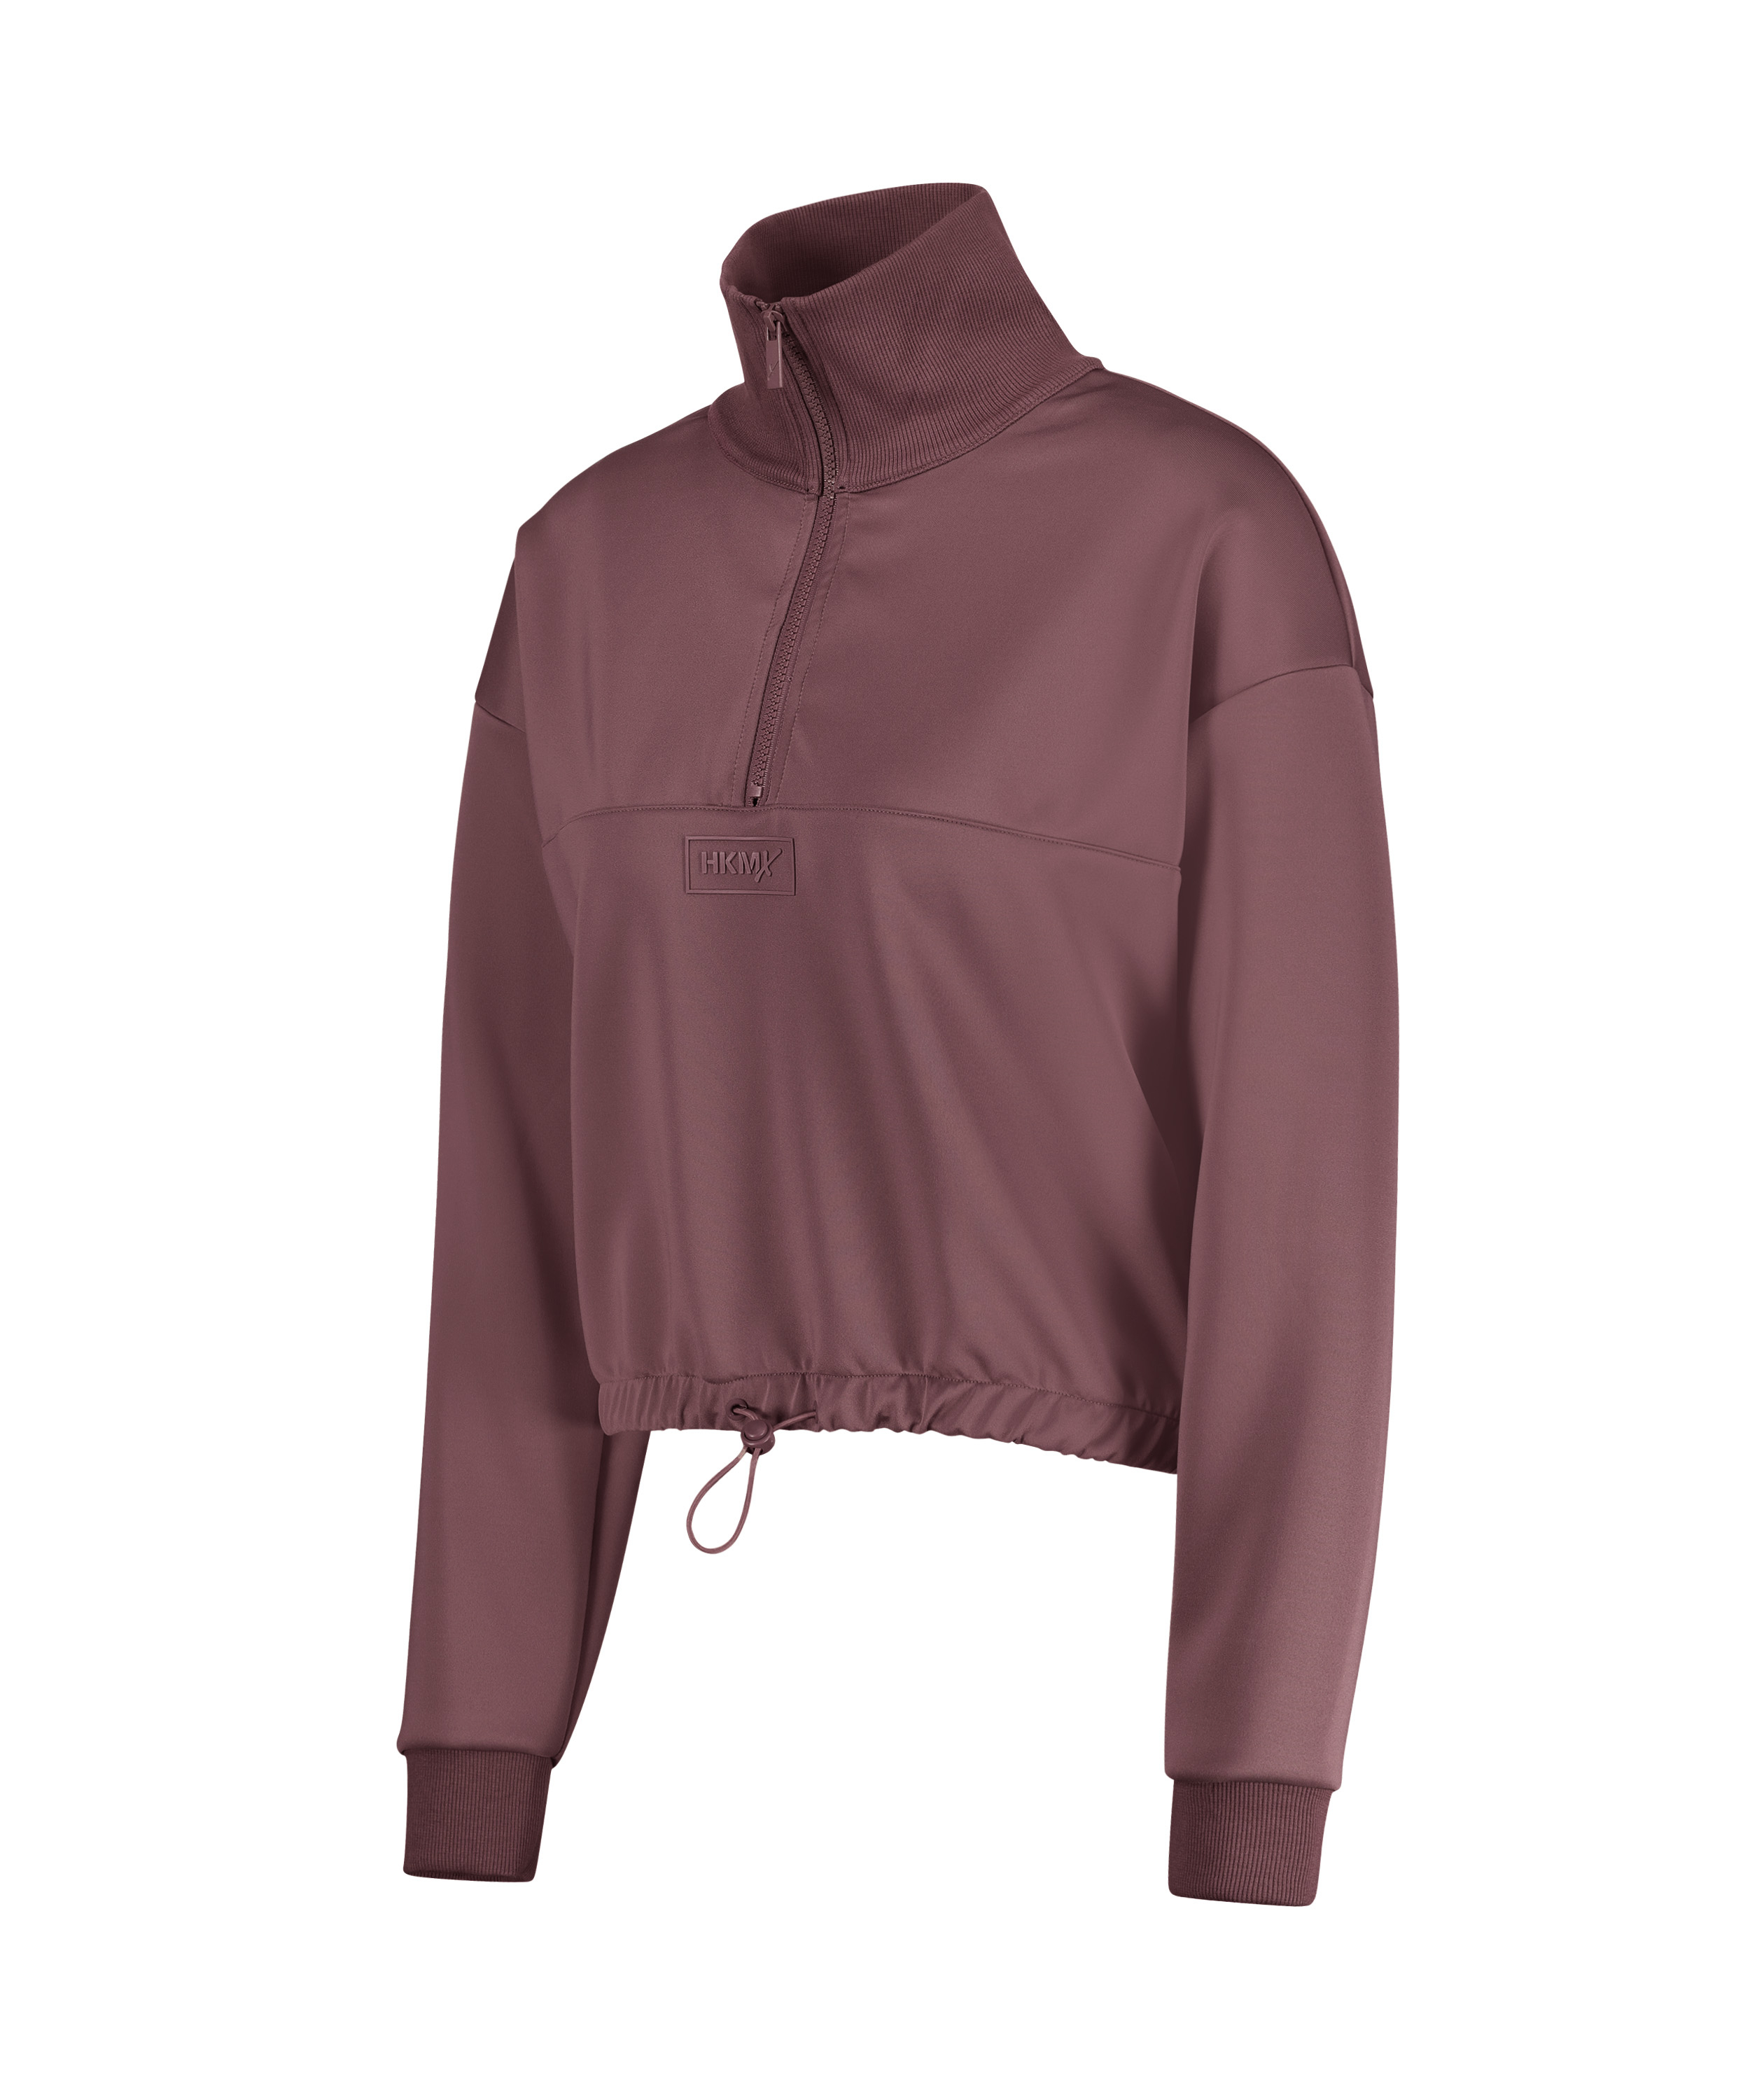 HKMX Pull sport Ruby, Pourpre, main